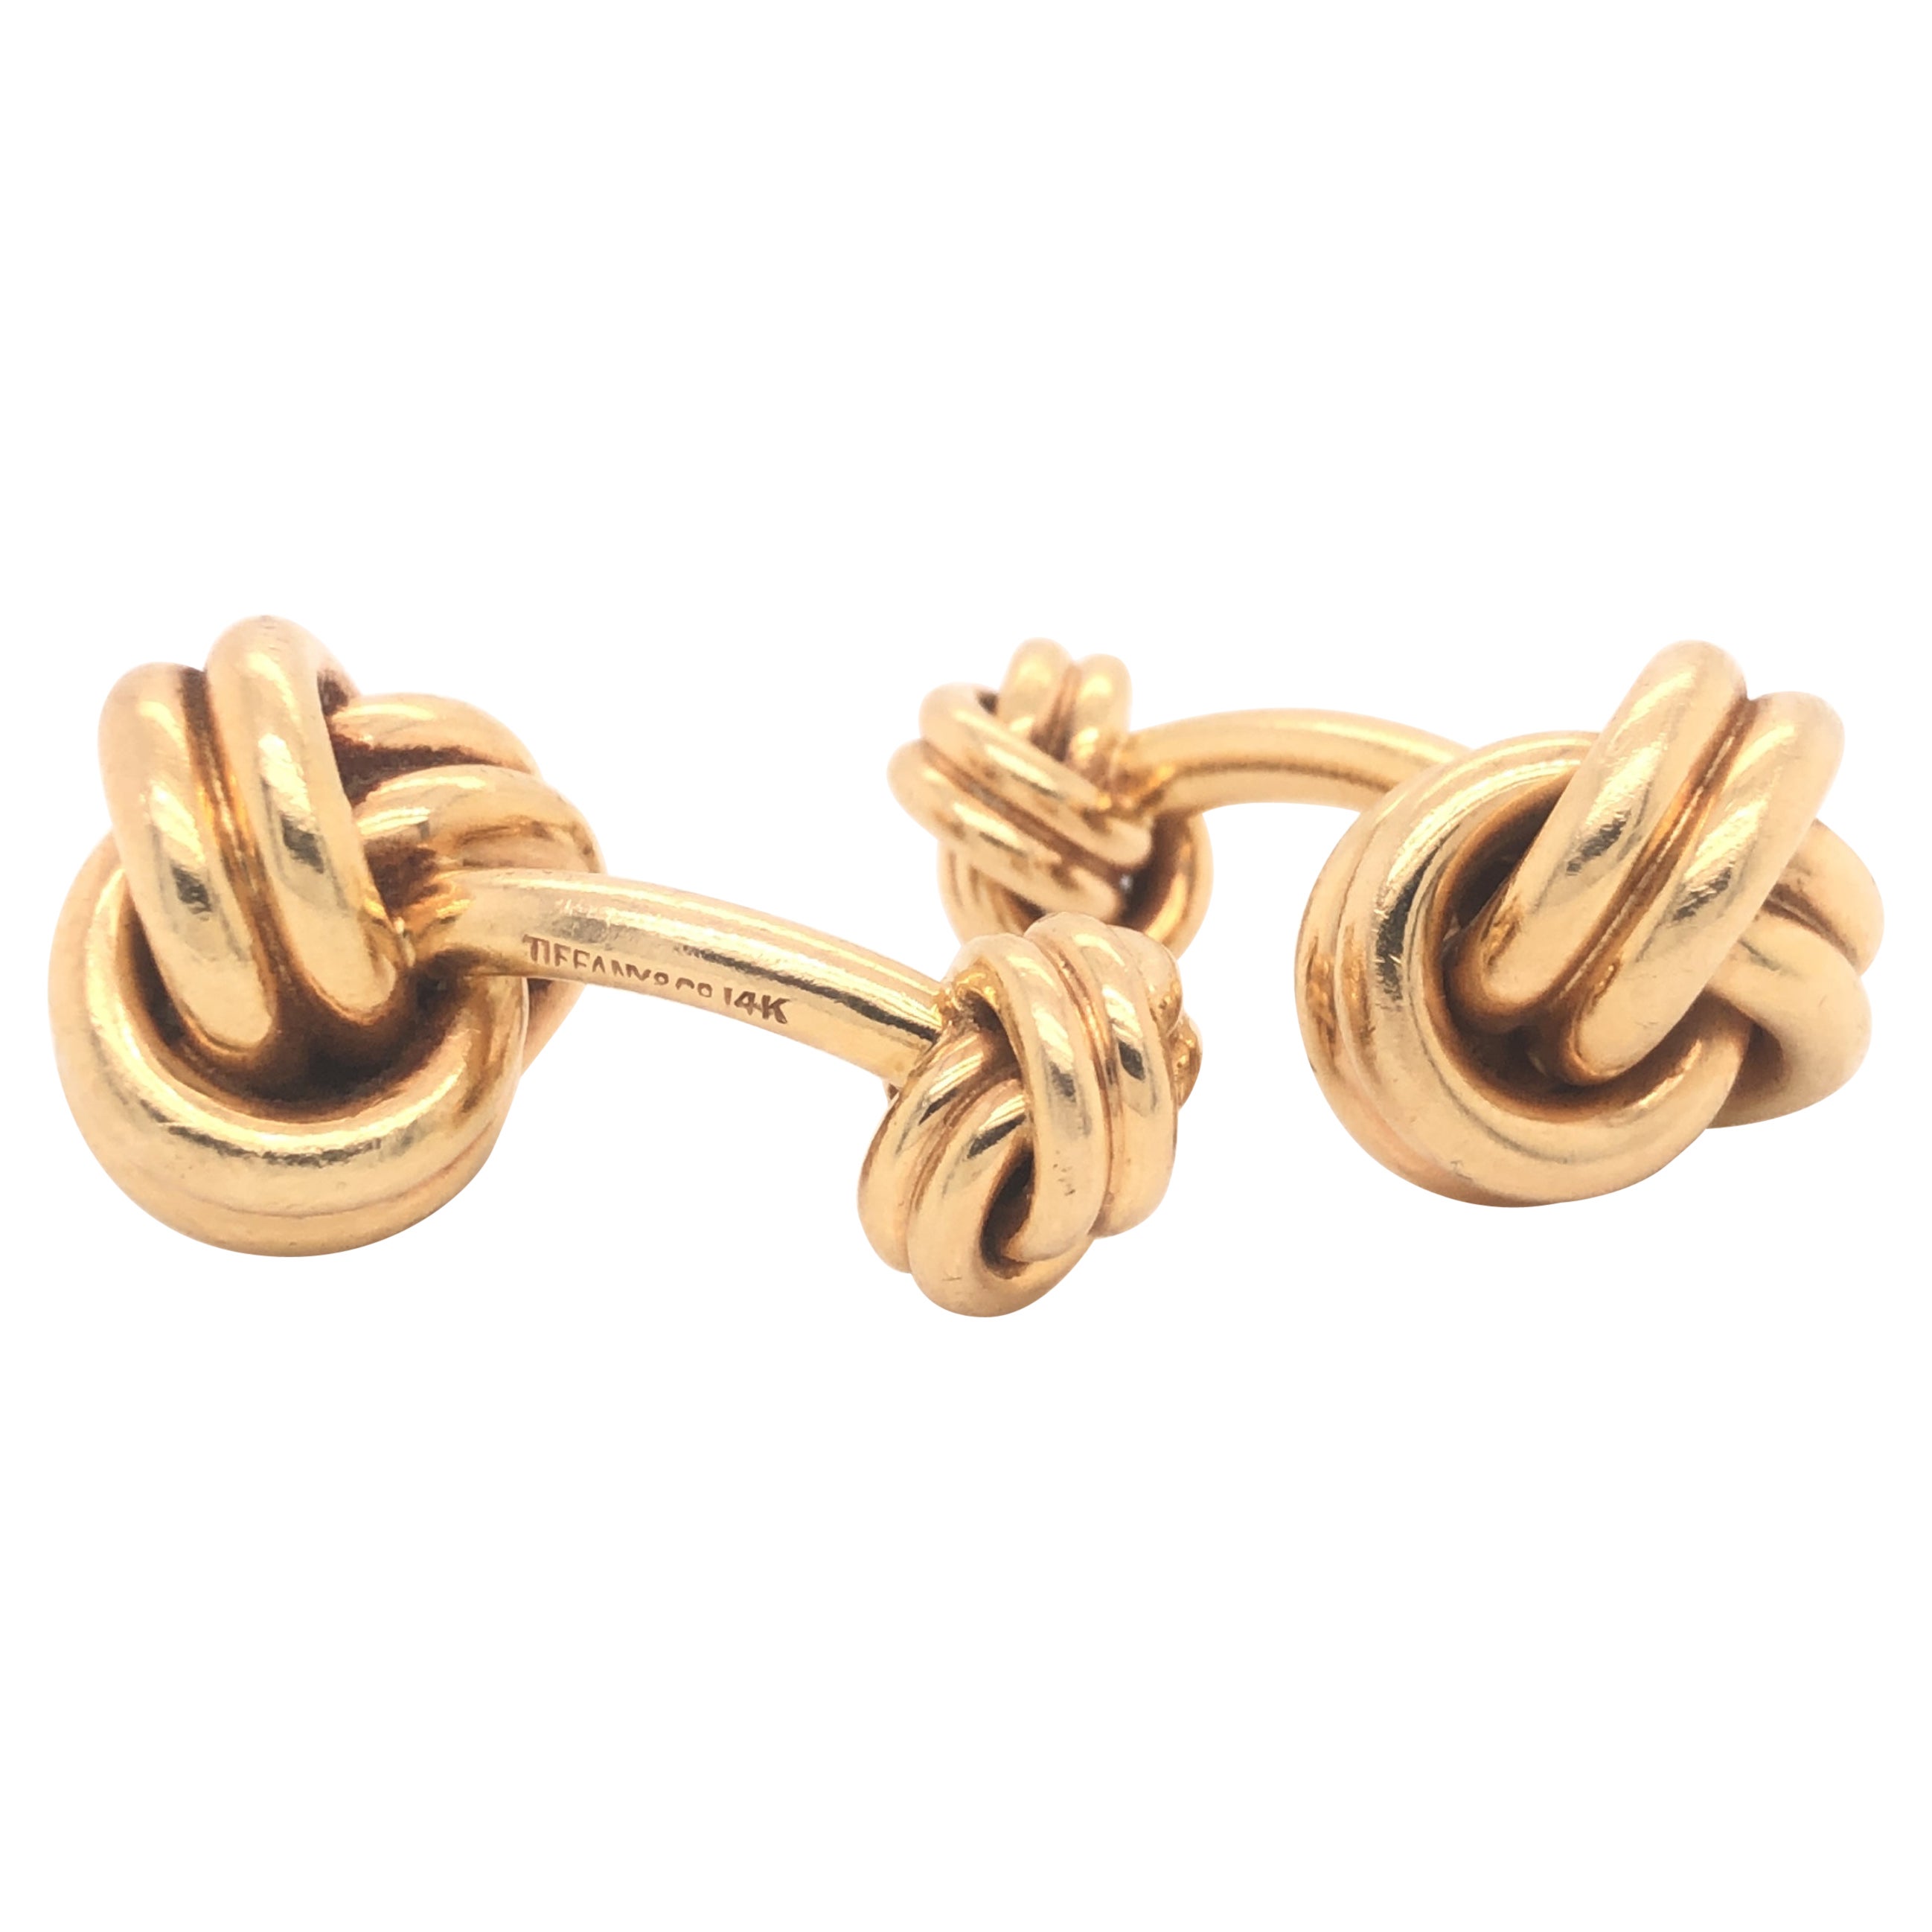 Tiffany & Co. Double Knot Vintage Cuff Links 14K Yellow Gold